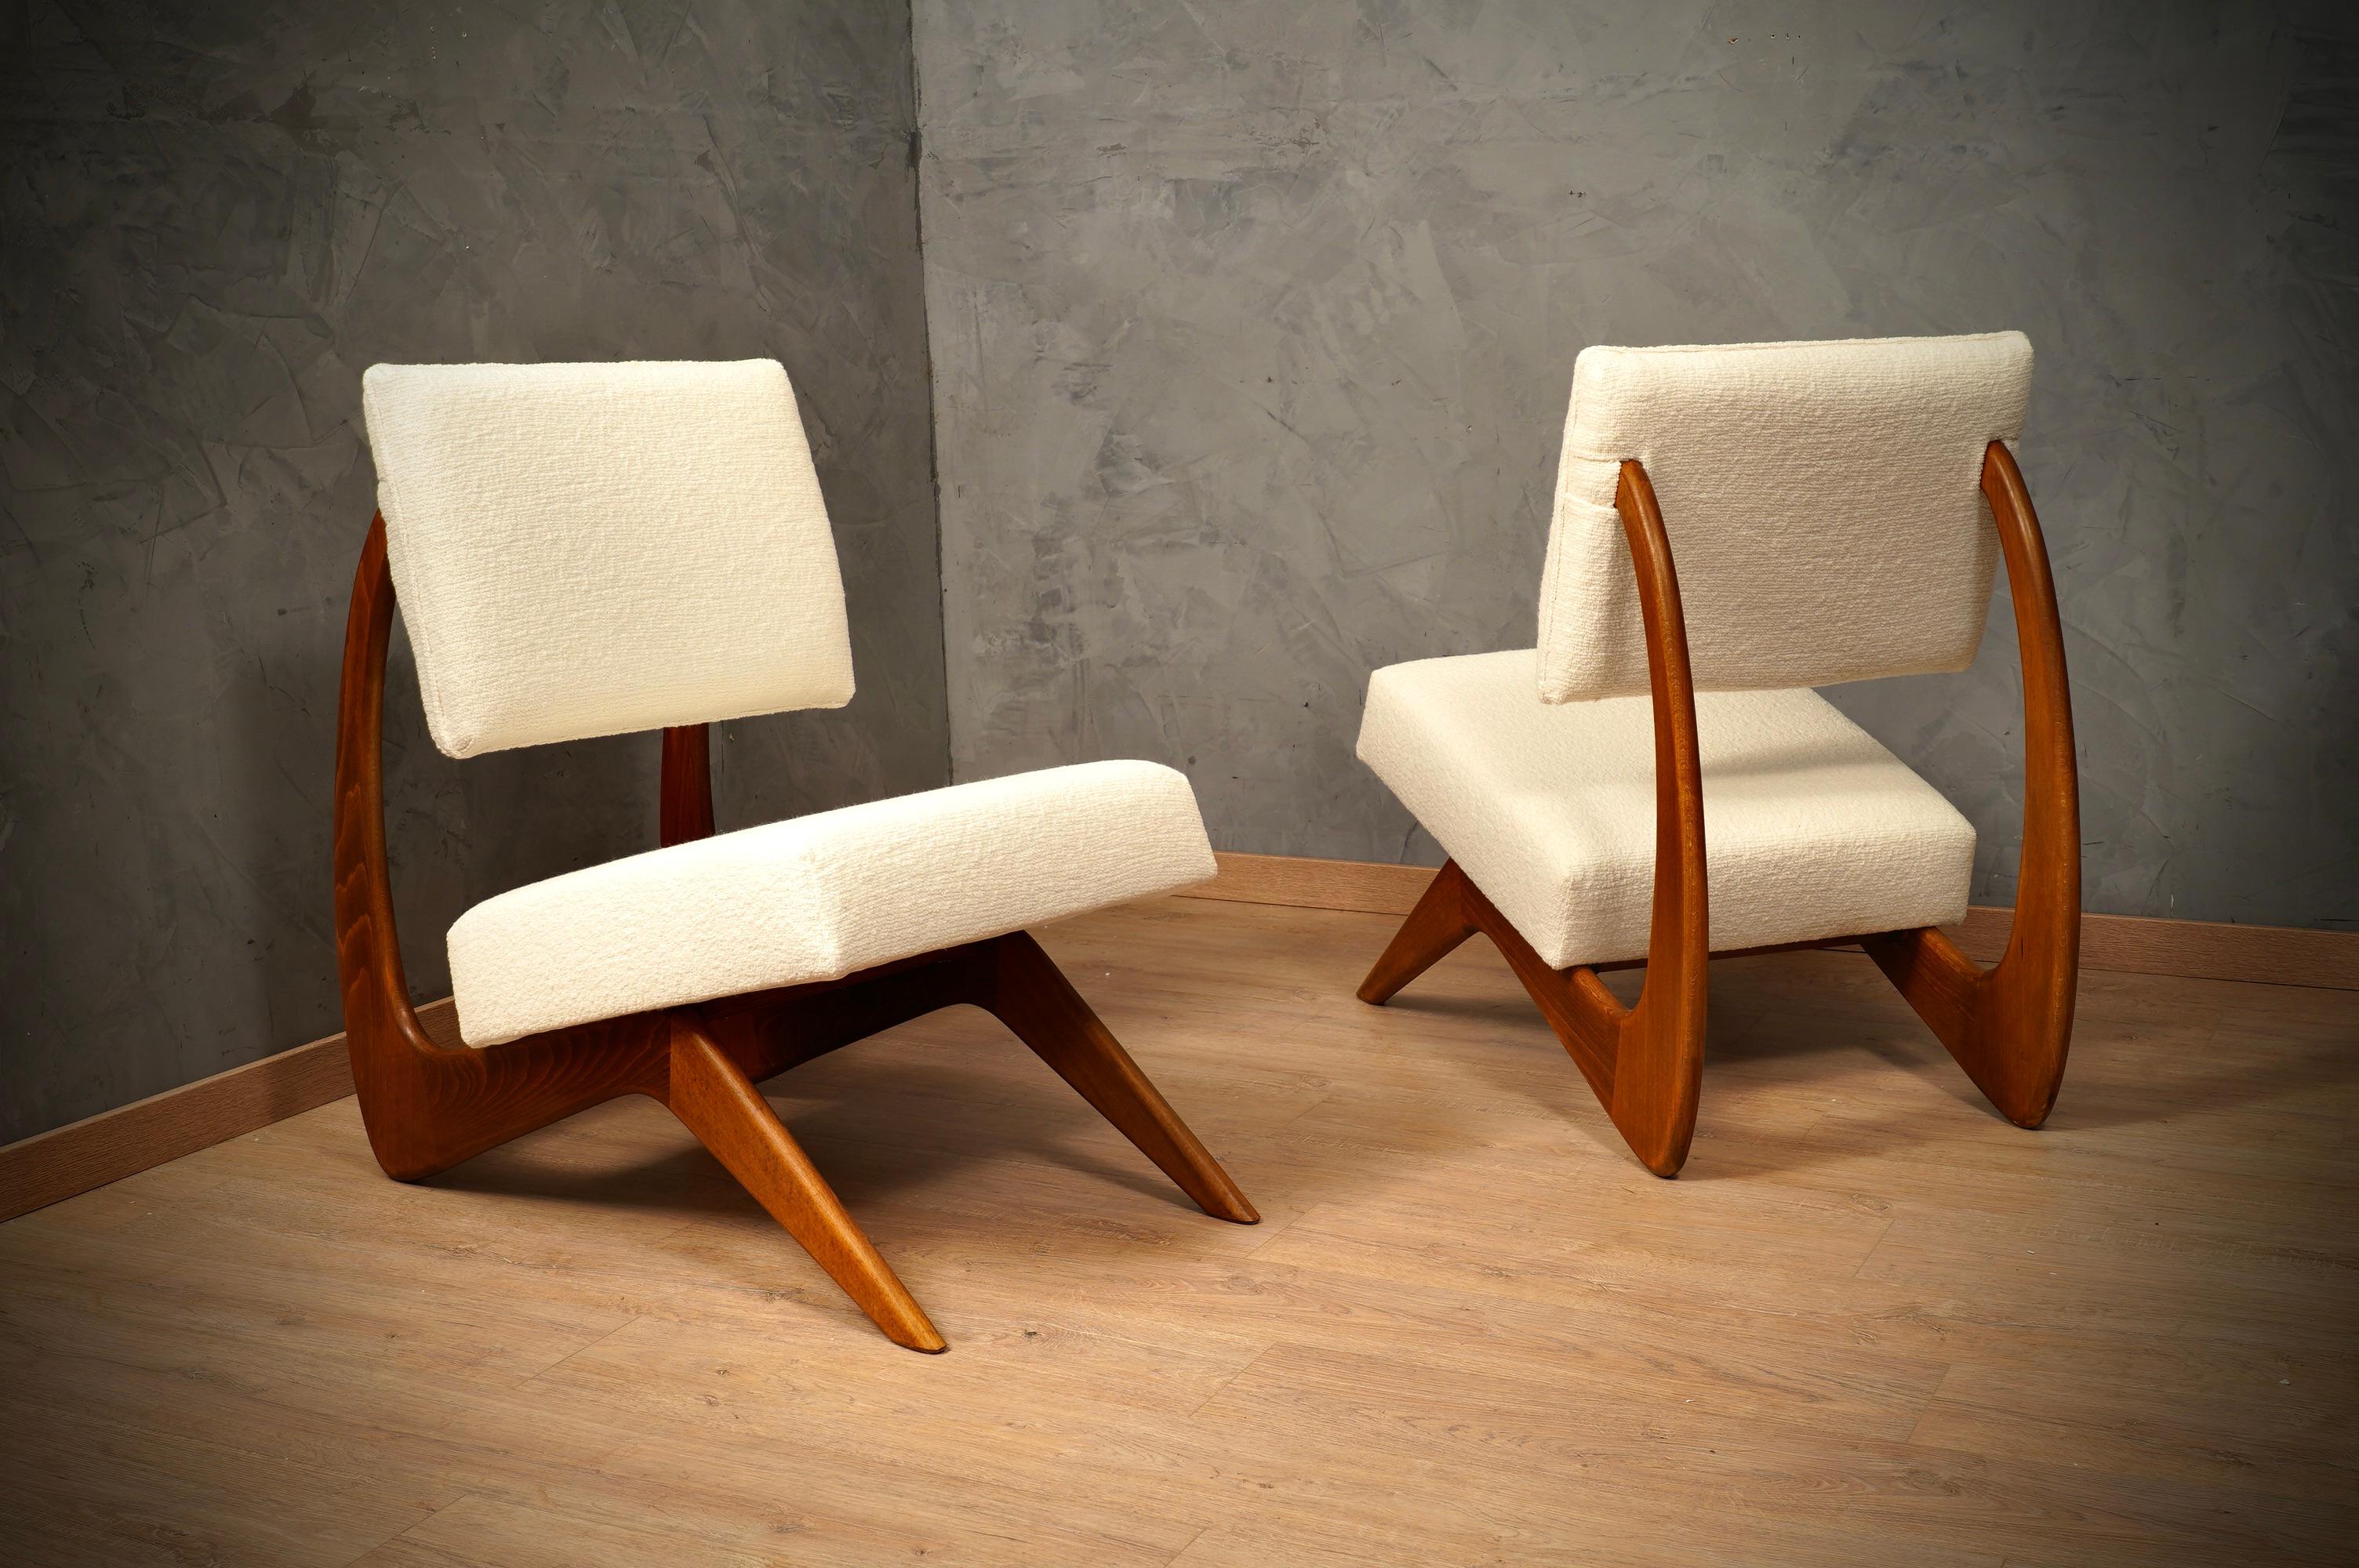 Armchairs with a particular design by the American architect Adrian Pearsall, a very daring designer in the shapes of his designs.

The armchairs have a very particular wooden structure as you can guess from the photos. A very original curve forms